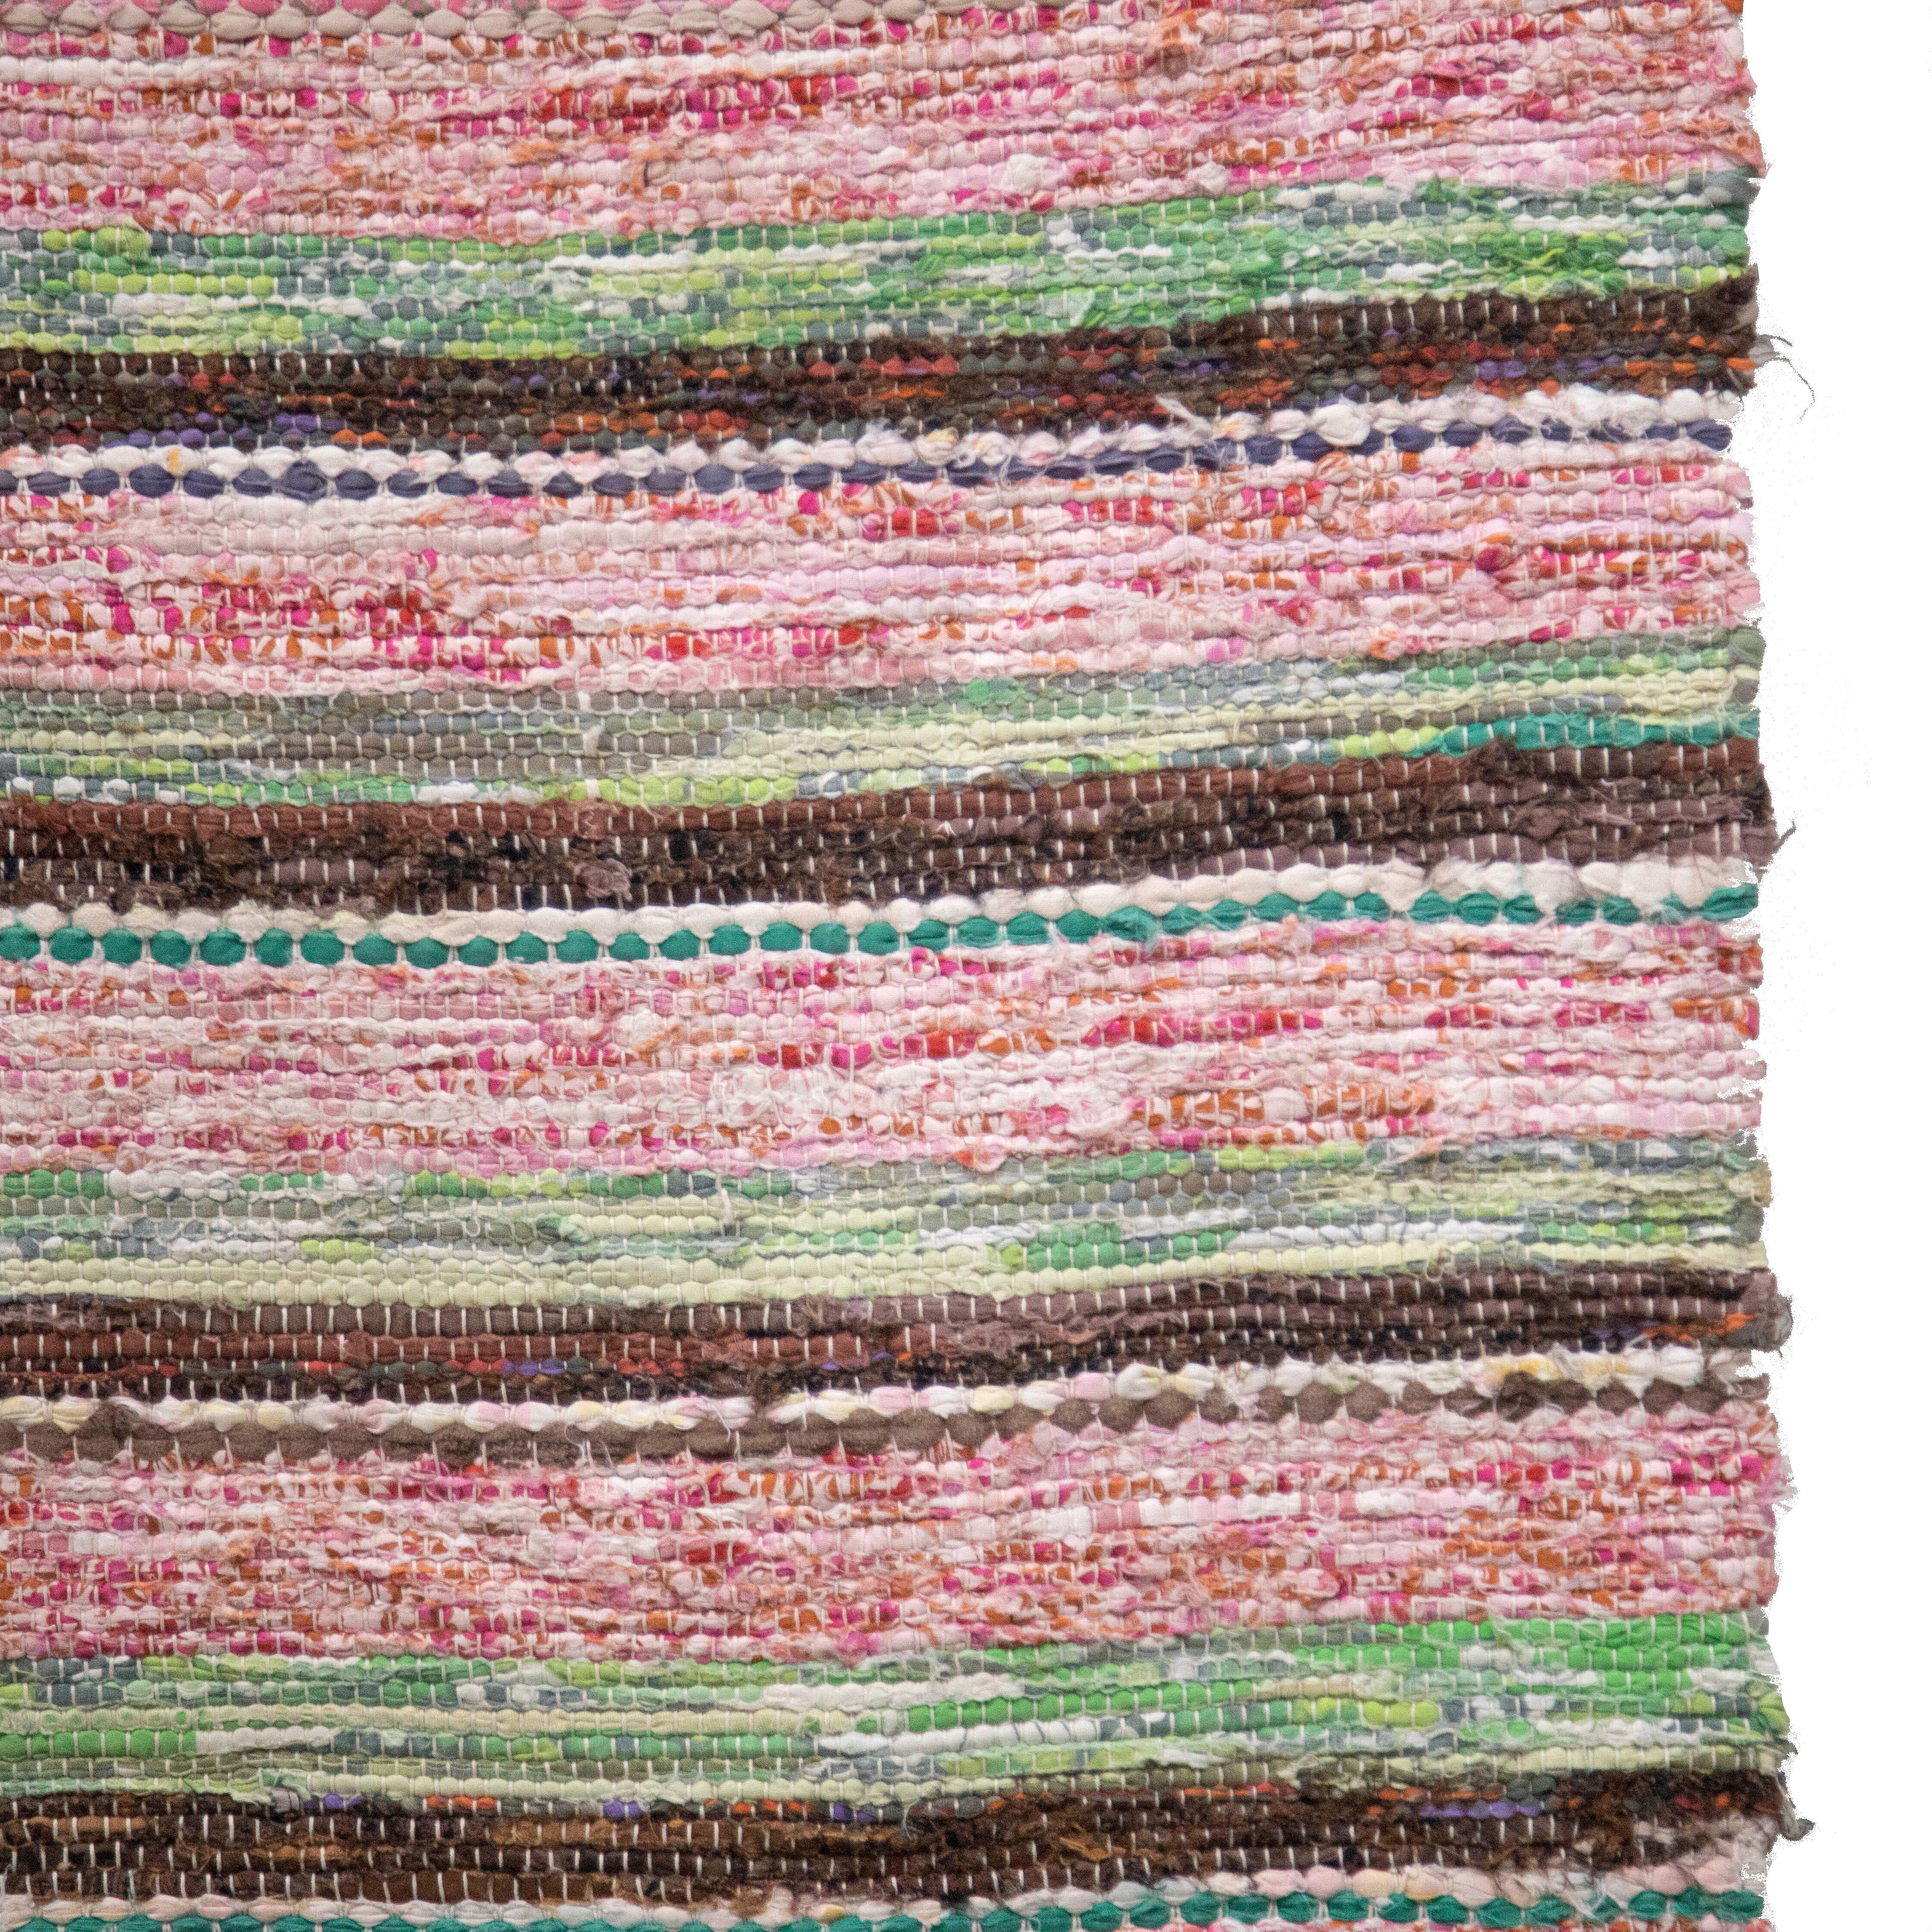 20th Century Swedish rag rug.   Featuring a stripe design in tones of brown, green, and red.   This rug is machine washable at 30 degrees.
RT6024593